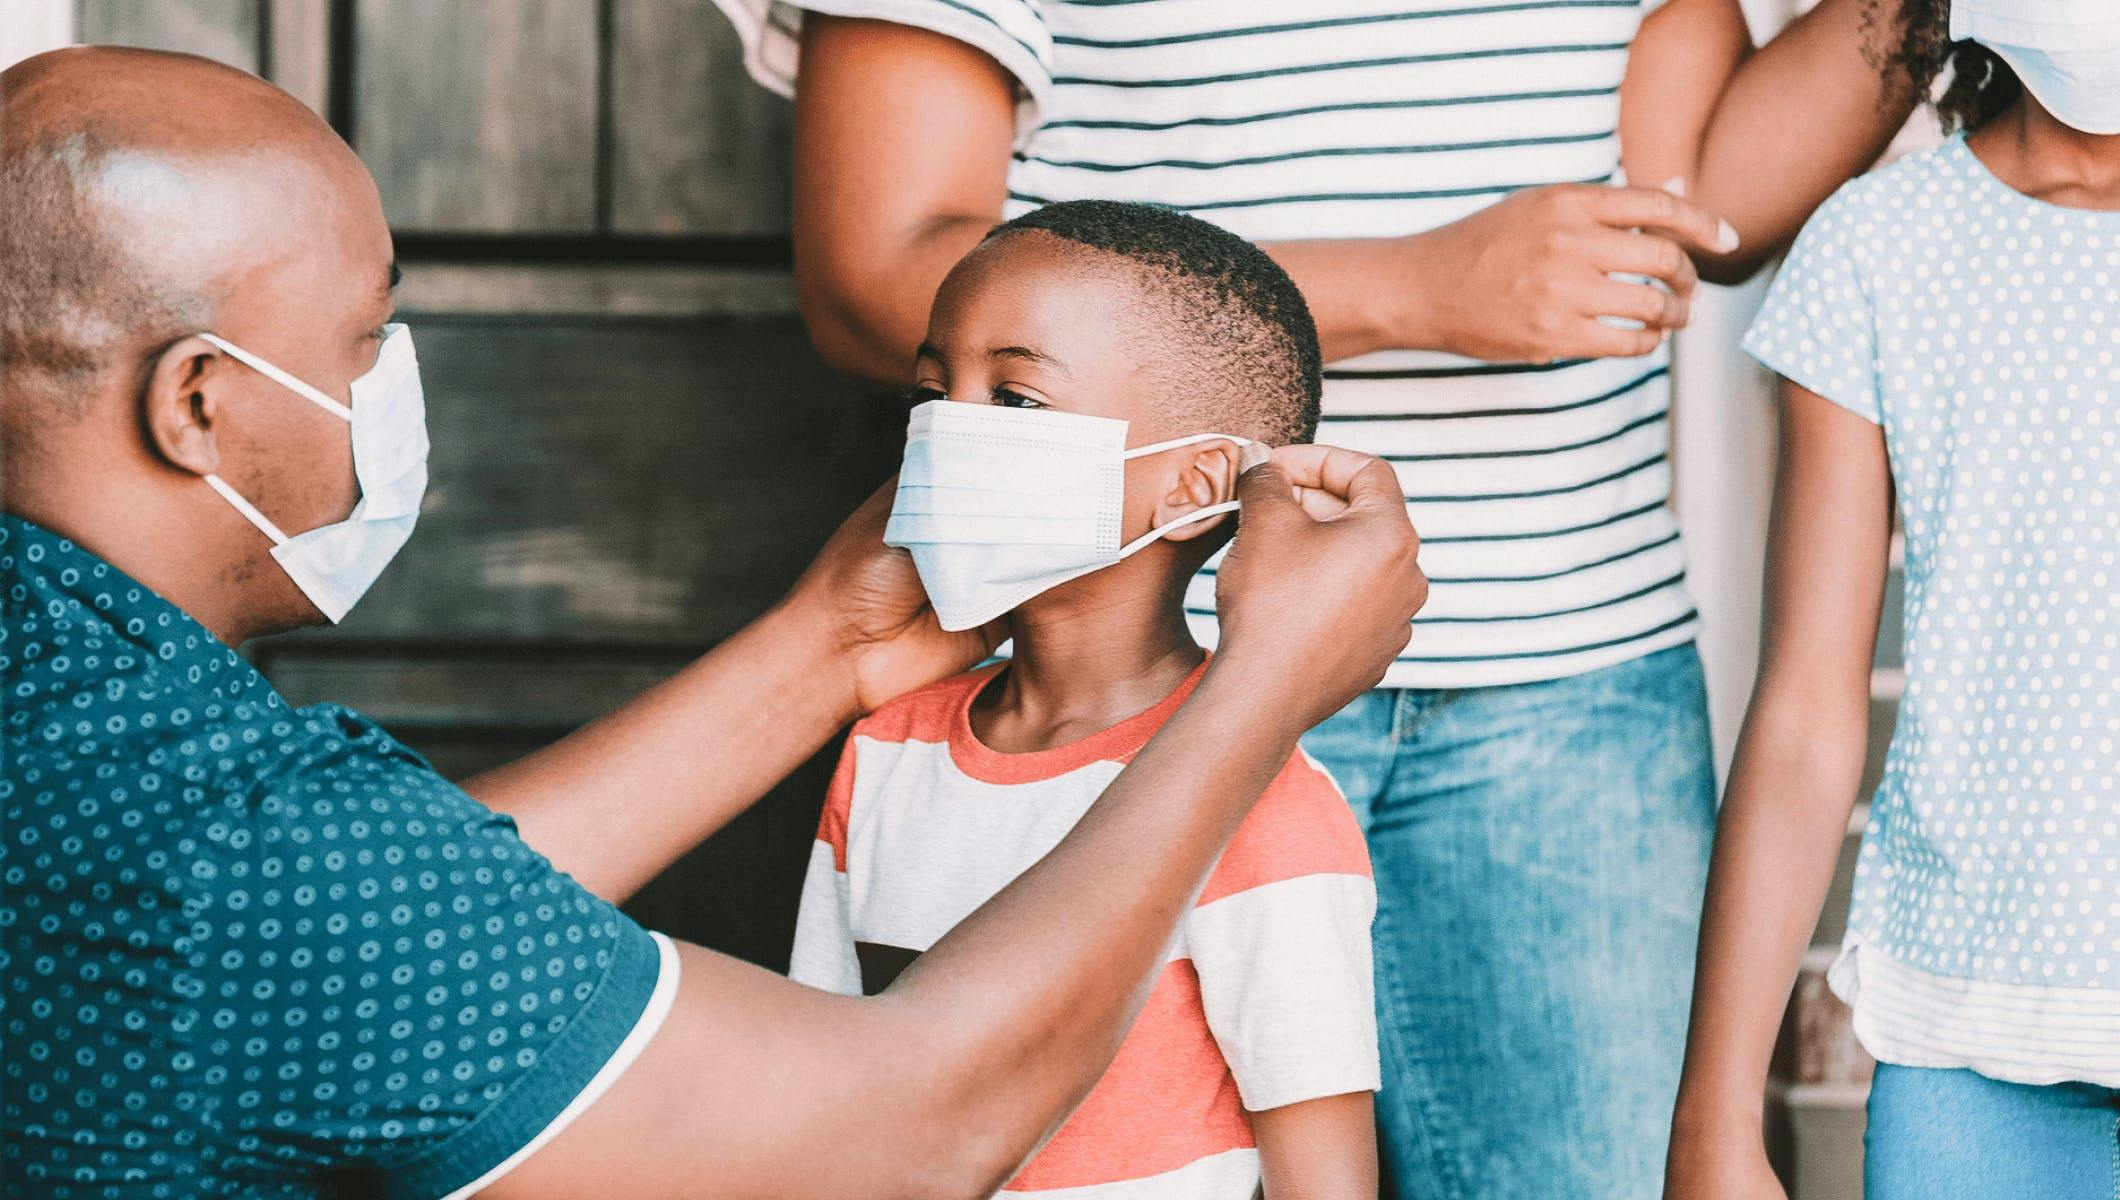 How to Wear a Mask in 2021: A Guide for Kids and Families